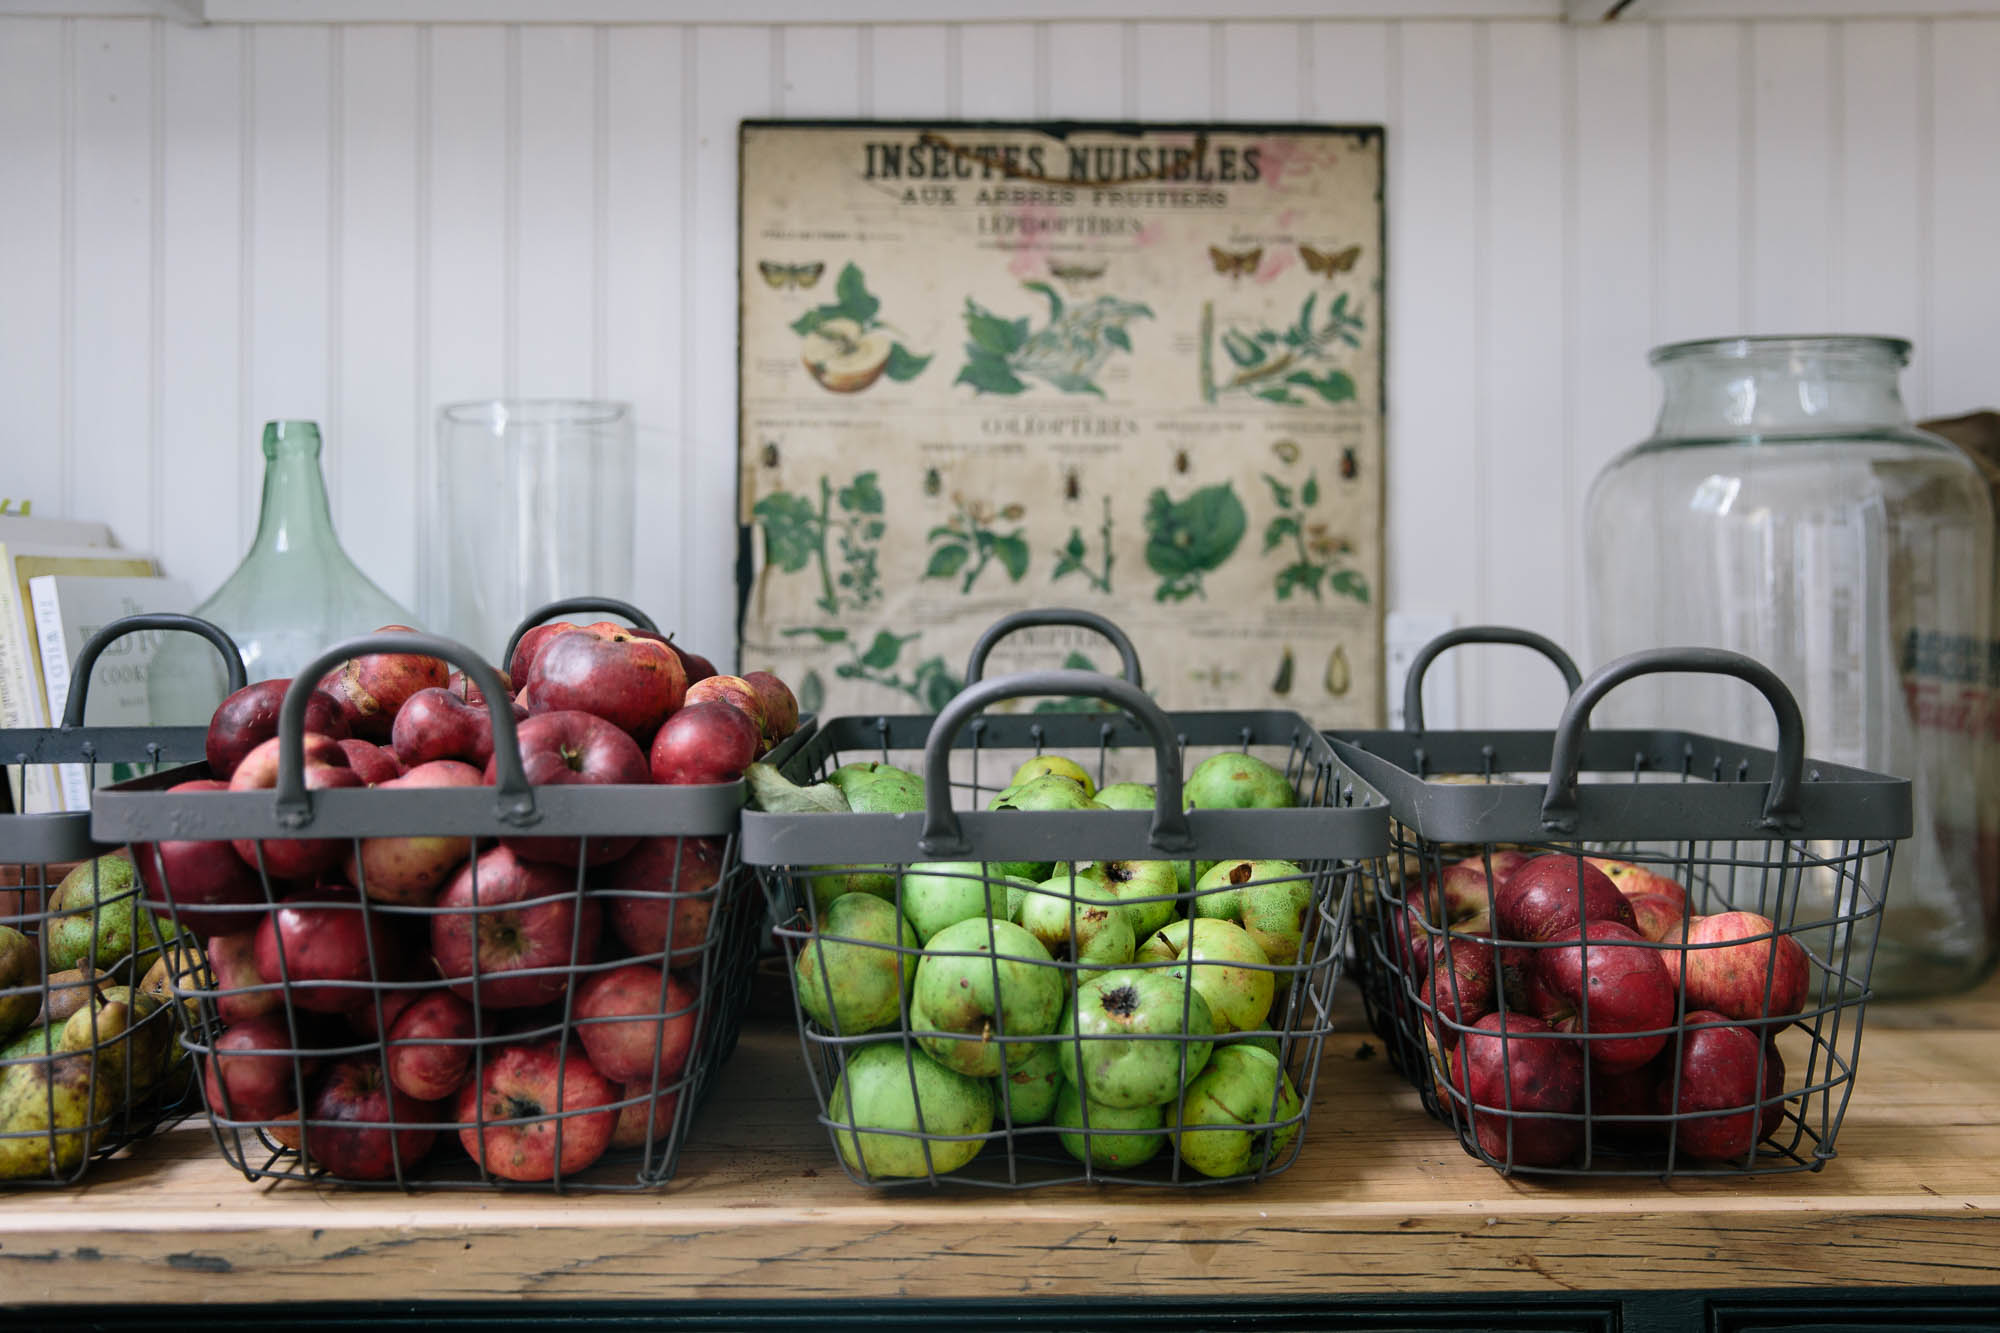 Baskets of red and green apples